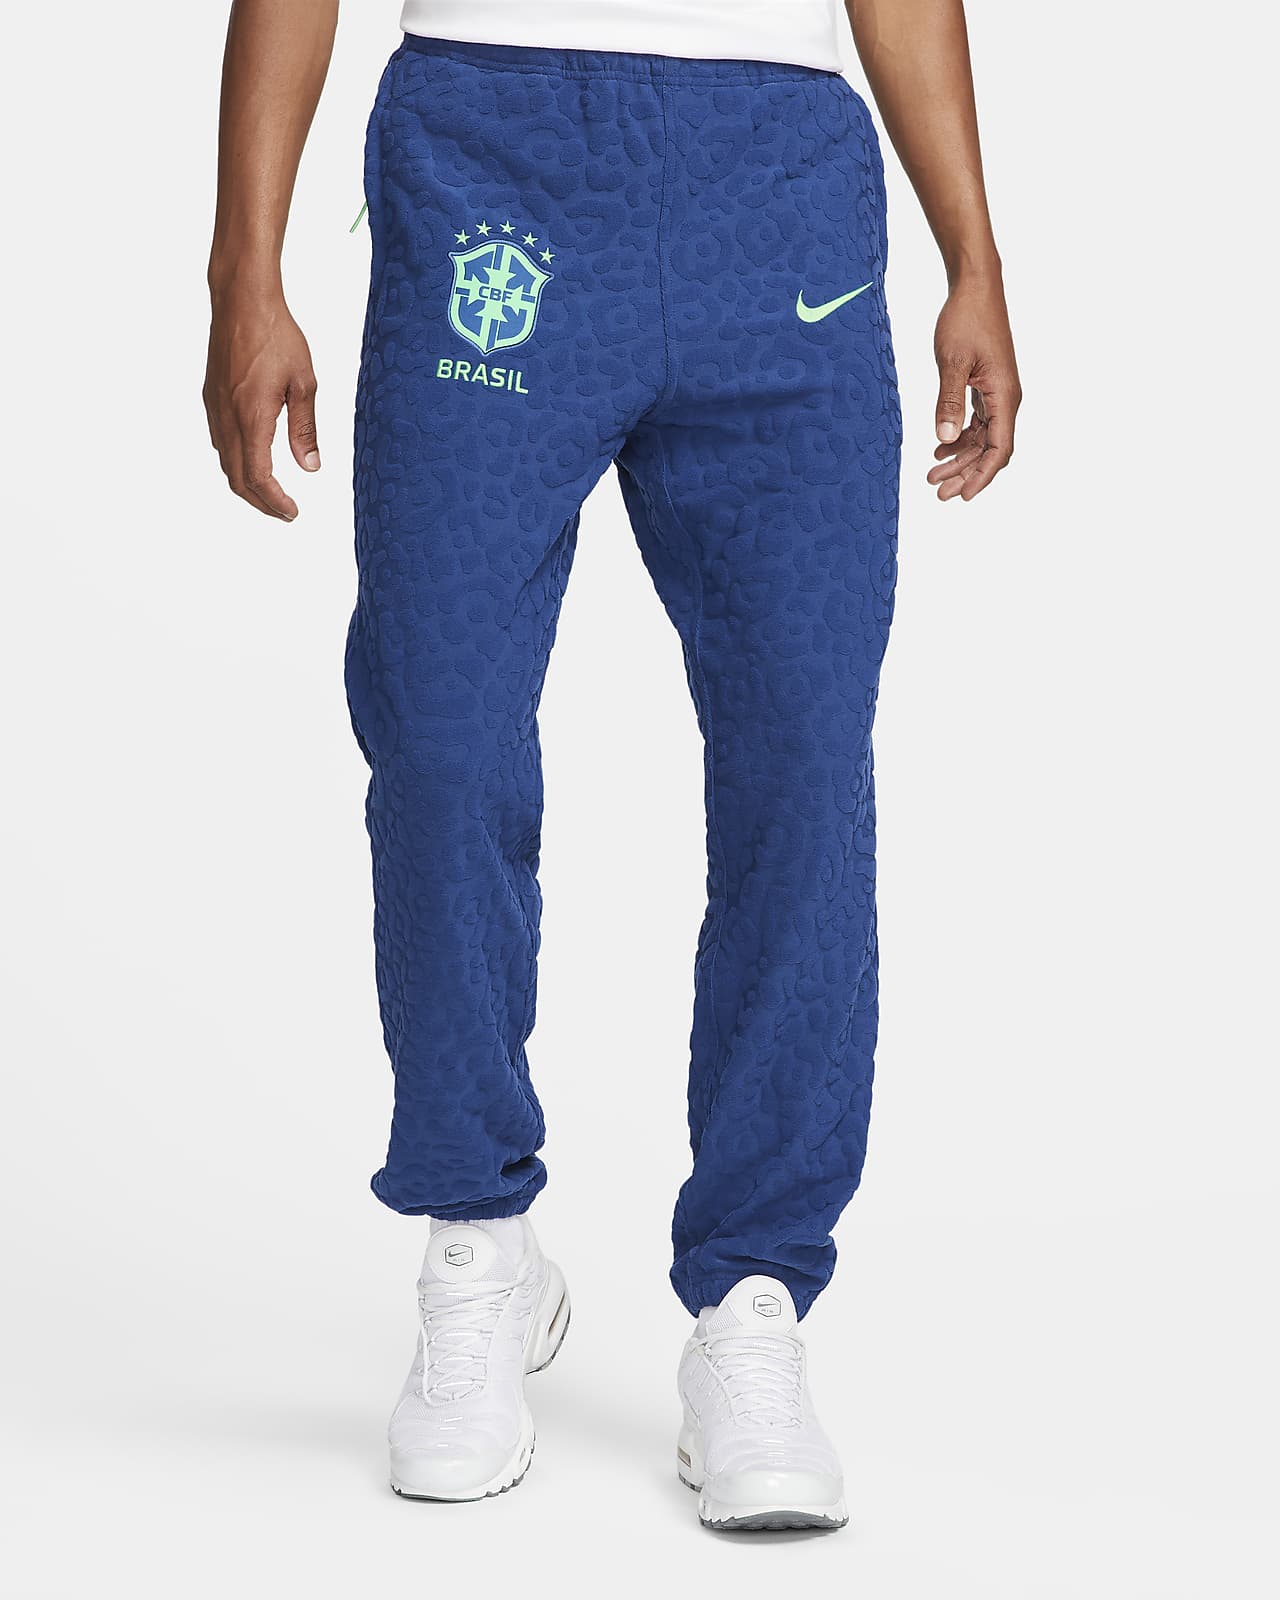 Brazil Men's French Terry Football Tracksuit Bottoms